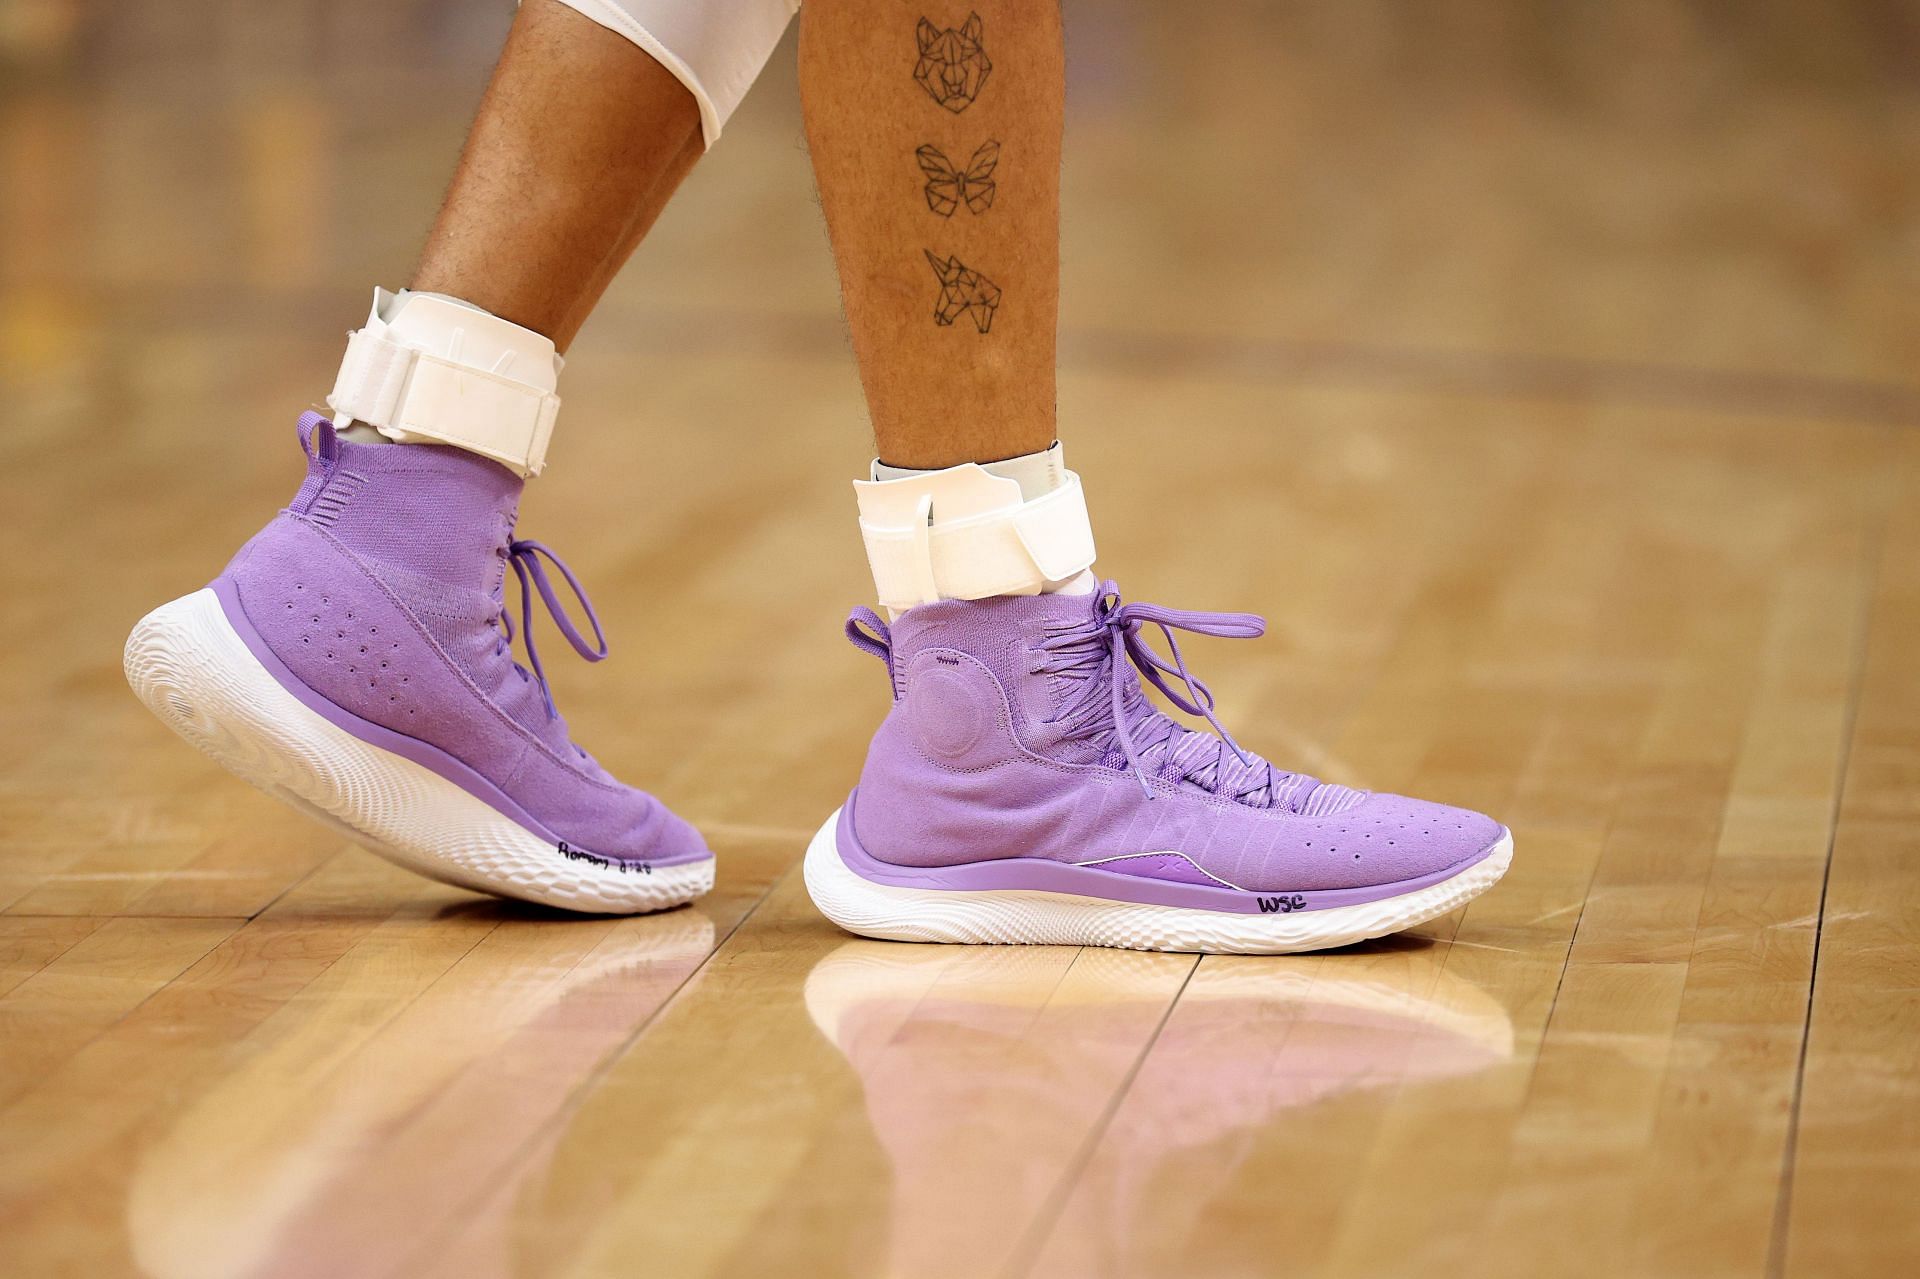 Curry&#039;s game-worn shoes by Under Armour. (Image via Getty Images)